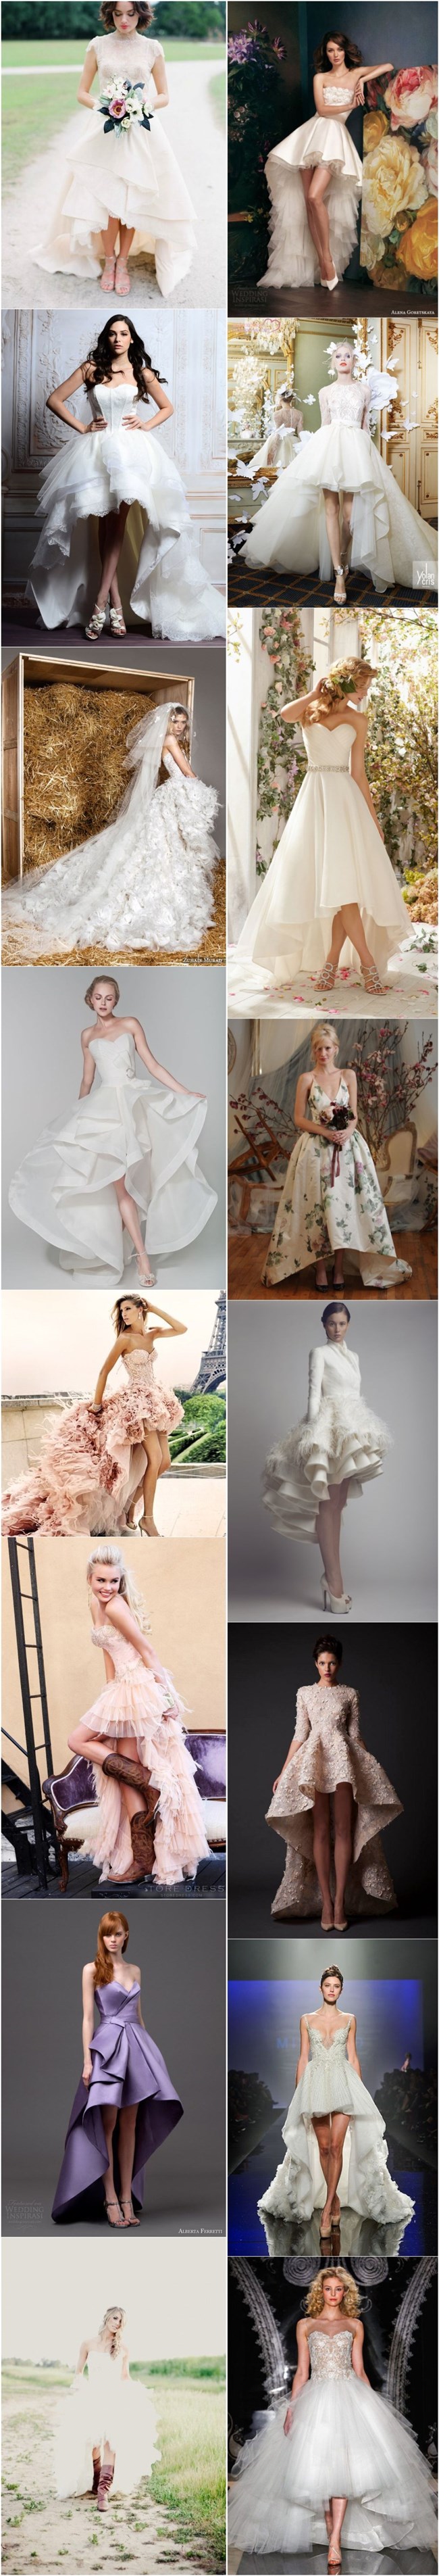 high-low wedding dresses and gowns